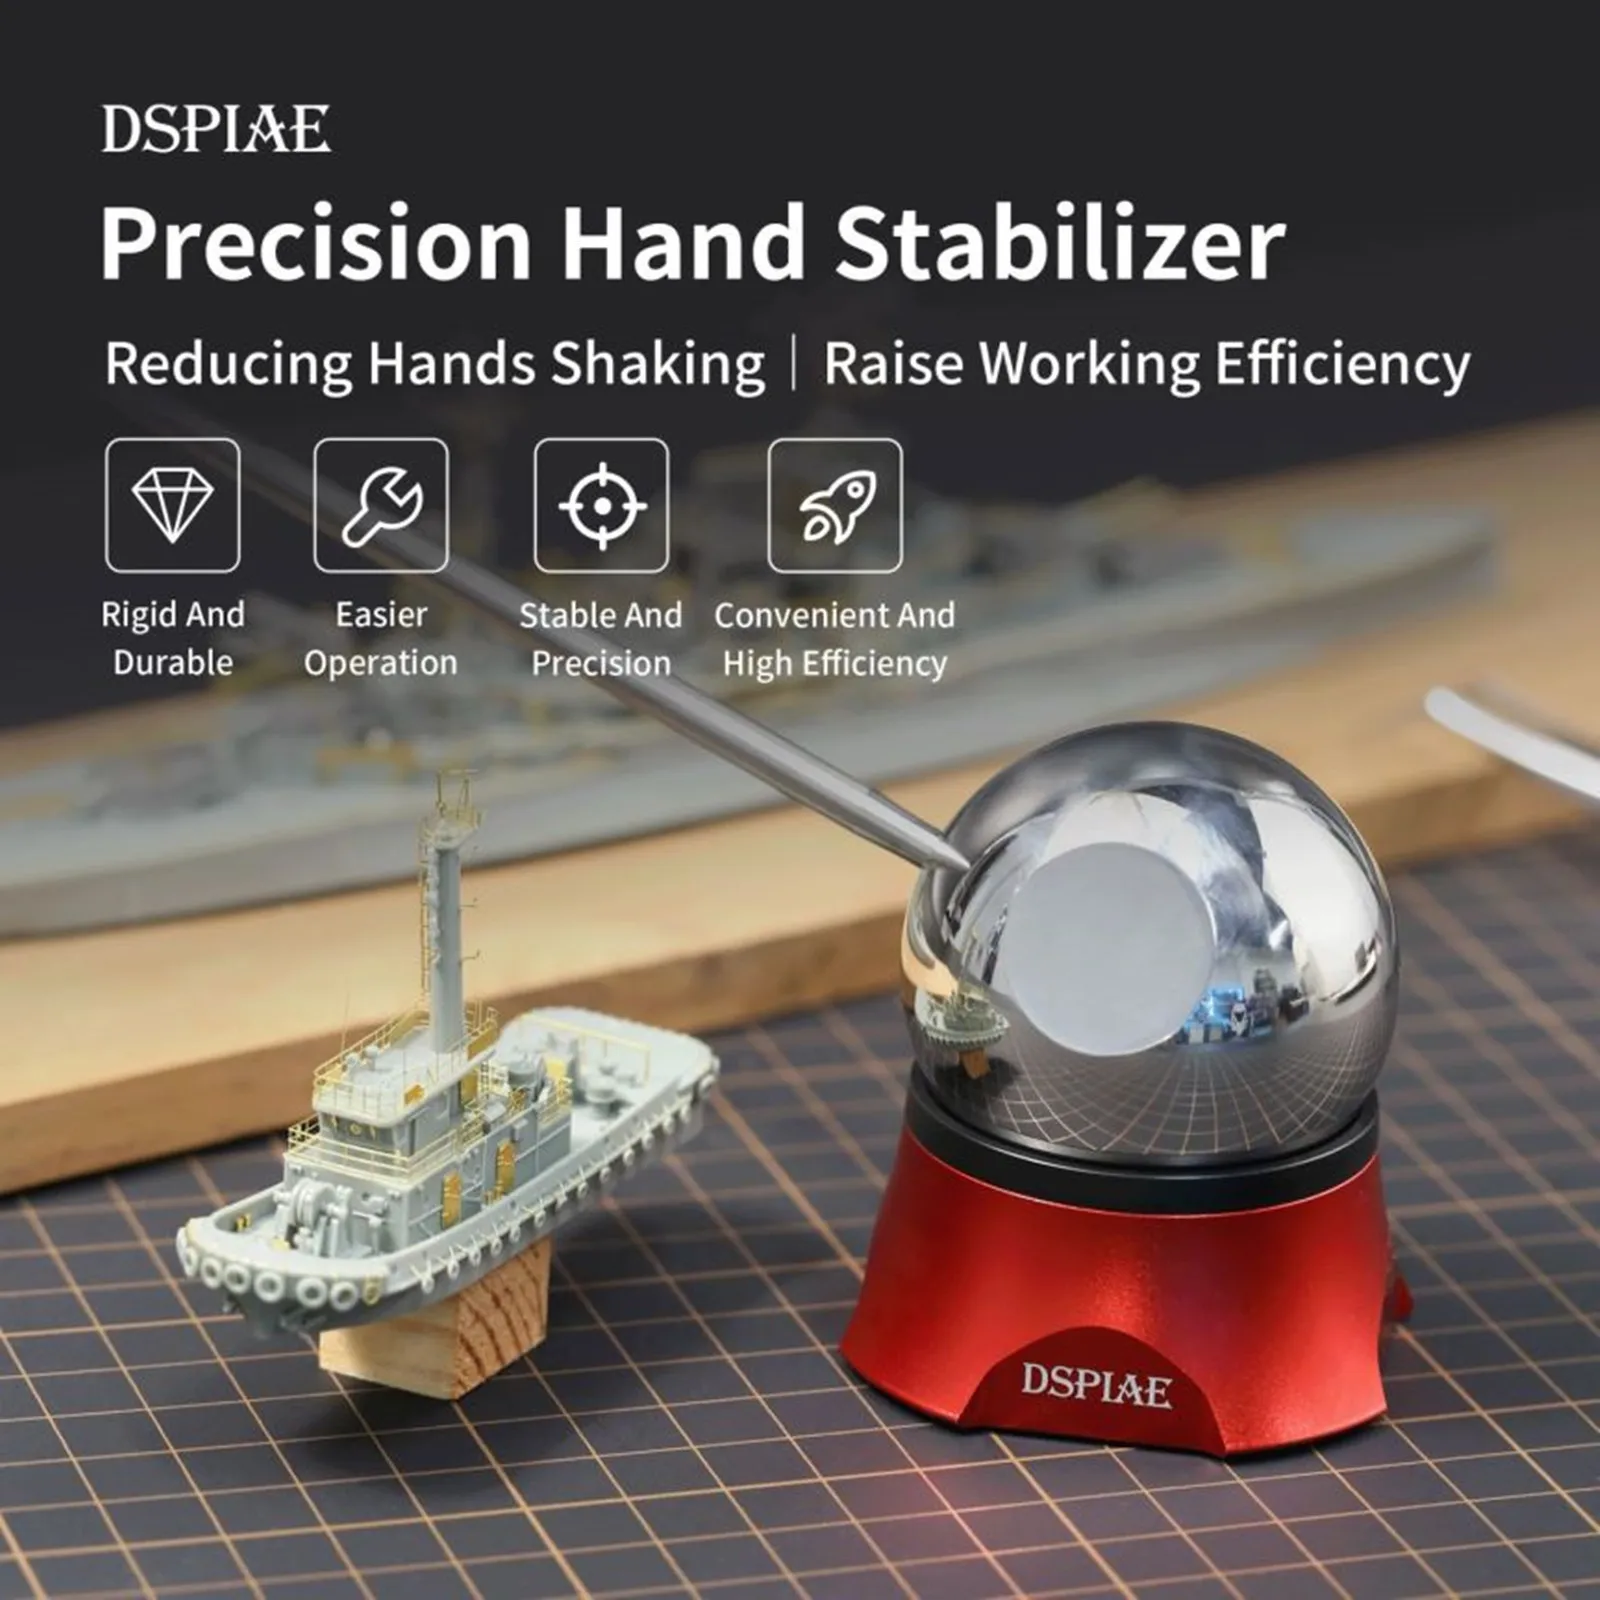 DSPIAE AT-HS Precision Hand Stabilizer Diy Red Model Tool Anti-shake Handrail Water Sticker Etching Sheet